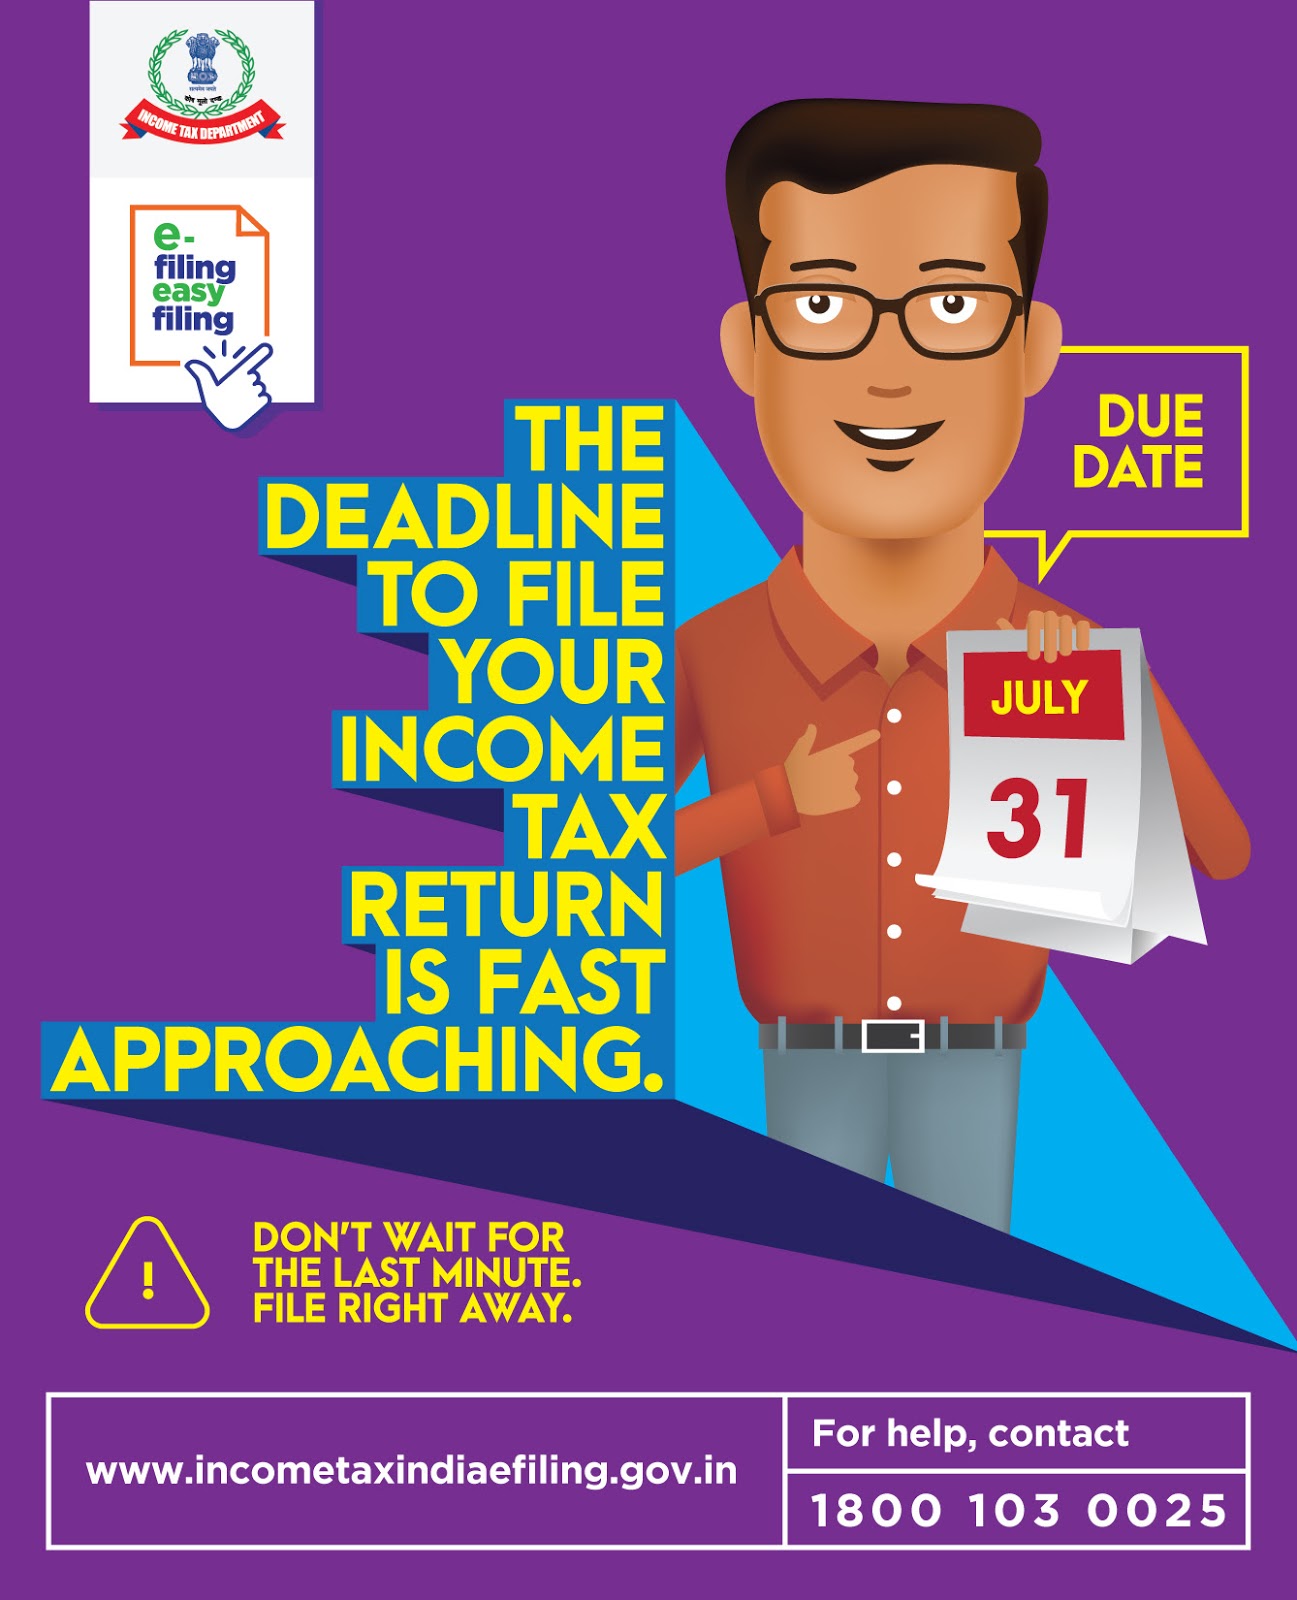 Last date for File your Tax Return 31 July 2019 SA POST